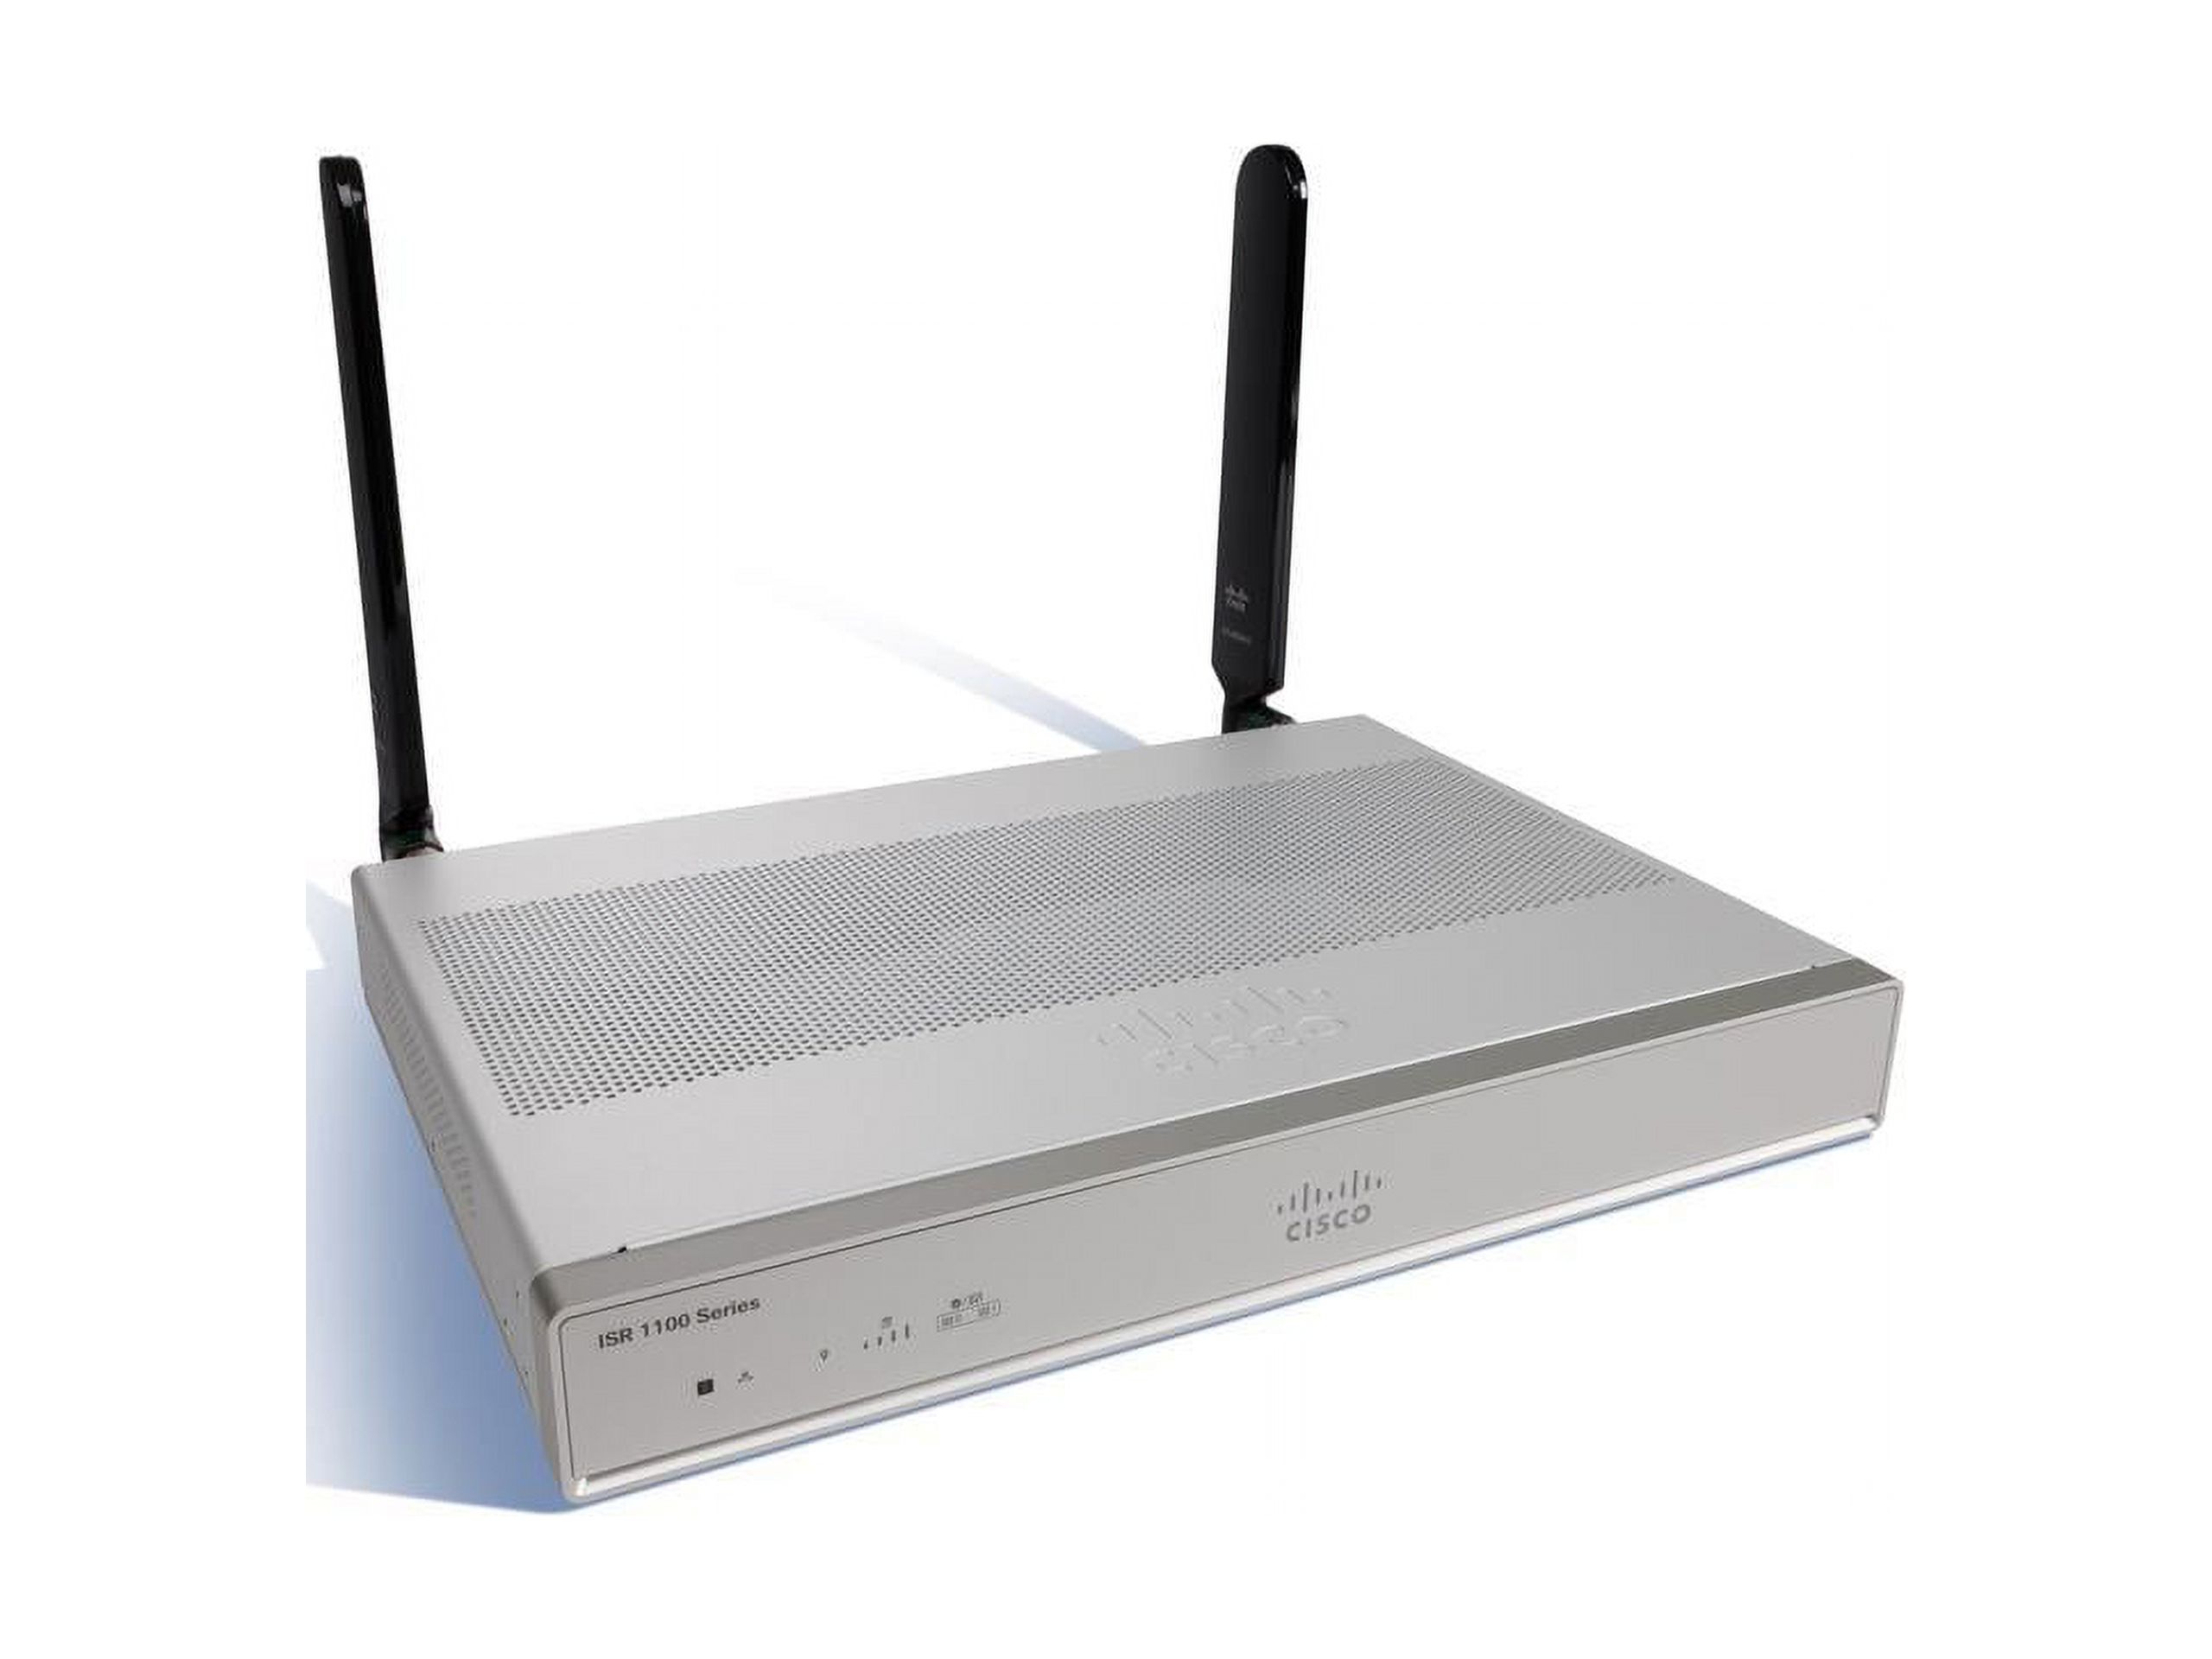 Cisco C1111-8PWB Wi-Fi 5 IEEE 802.11ac Ethernet Wireless Router - image 1 of 6